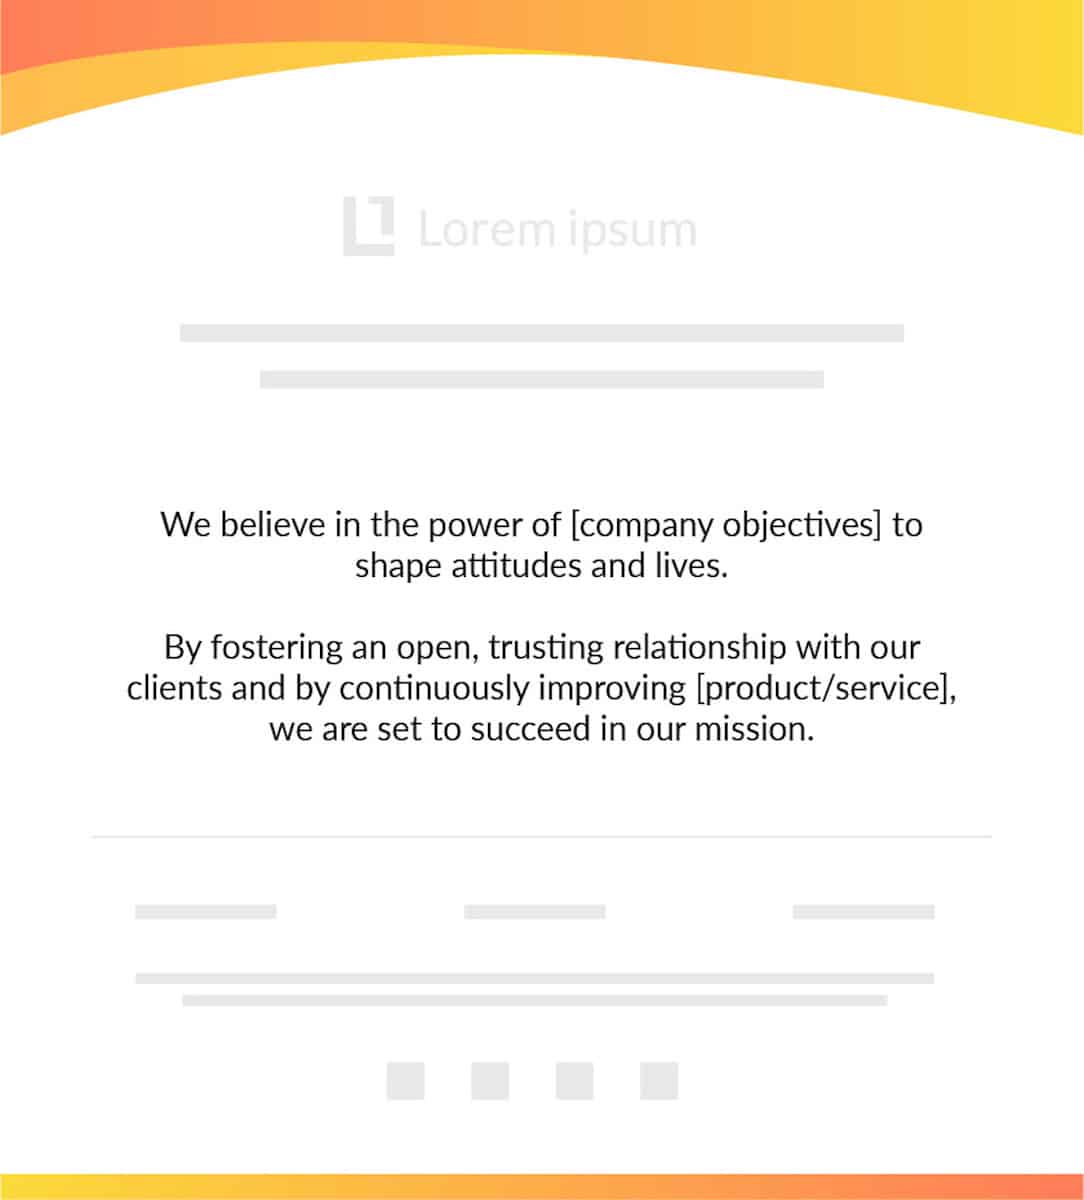 Image of company mission statement internal communications template created using ContactMonkey's email template builder.